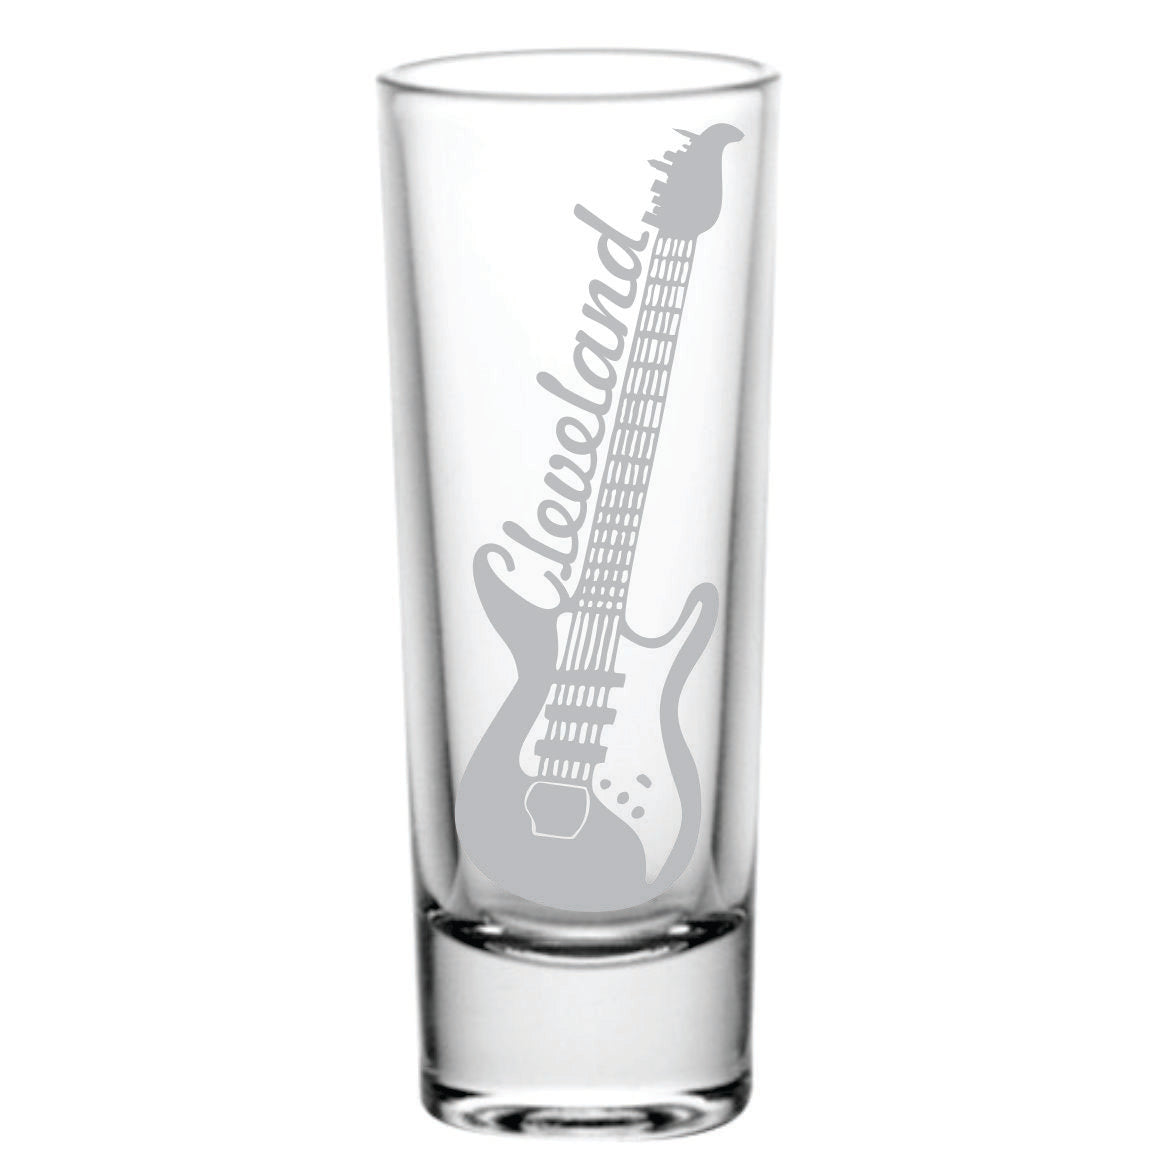 This glass shotglass is laser etched. The image is a guitar with Cleveland on the side and the skyline on the tuner.